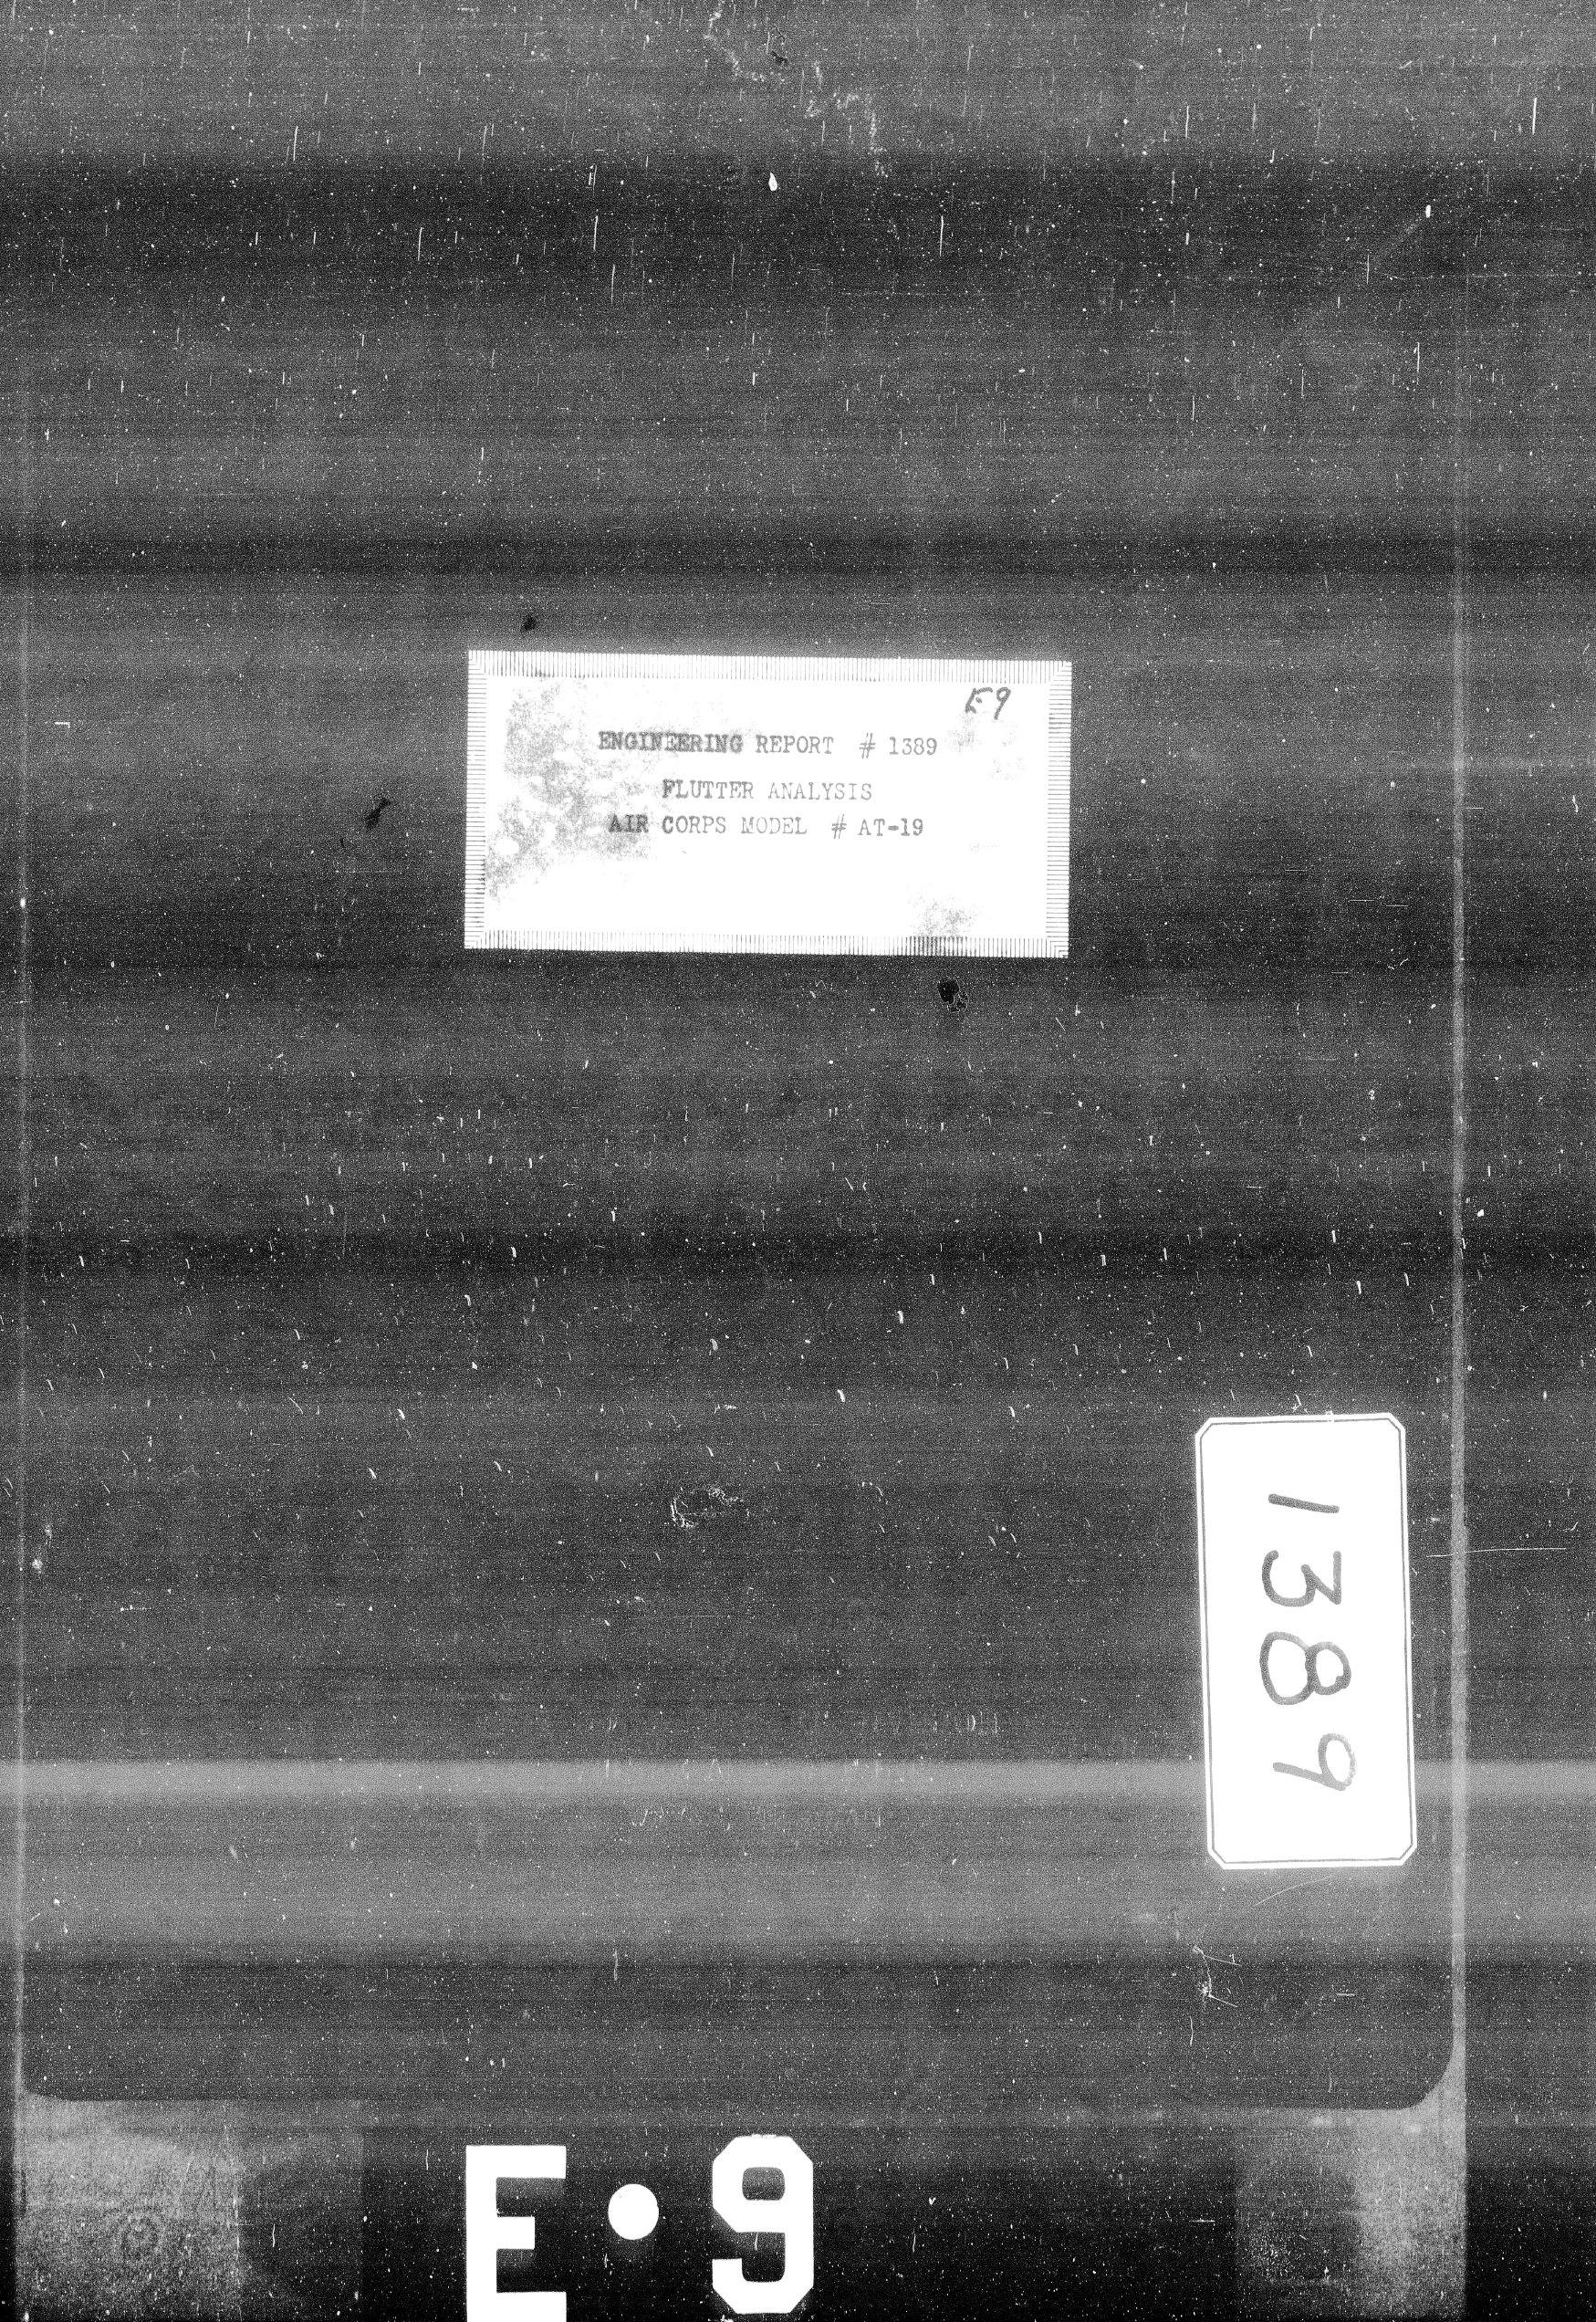 Sample page 1 from AirCorps Library document: Flutter Analysis for Air Corps Model AT-19